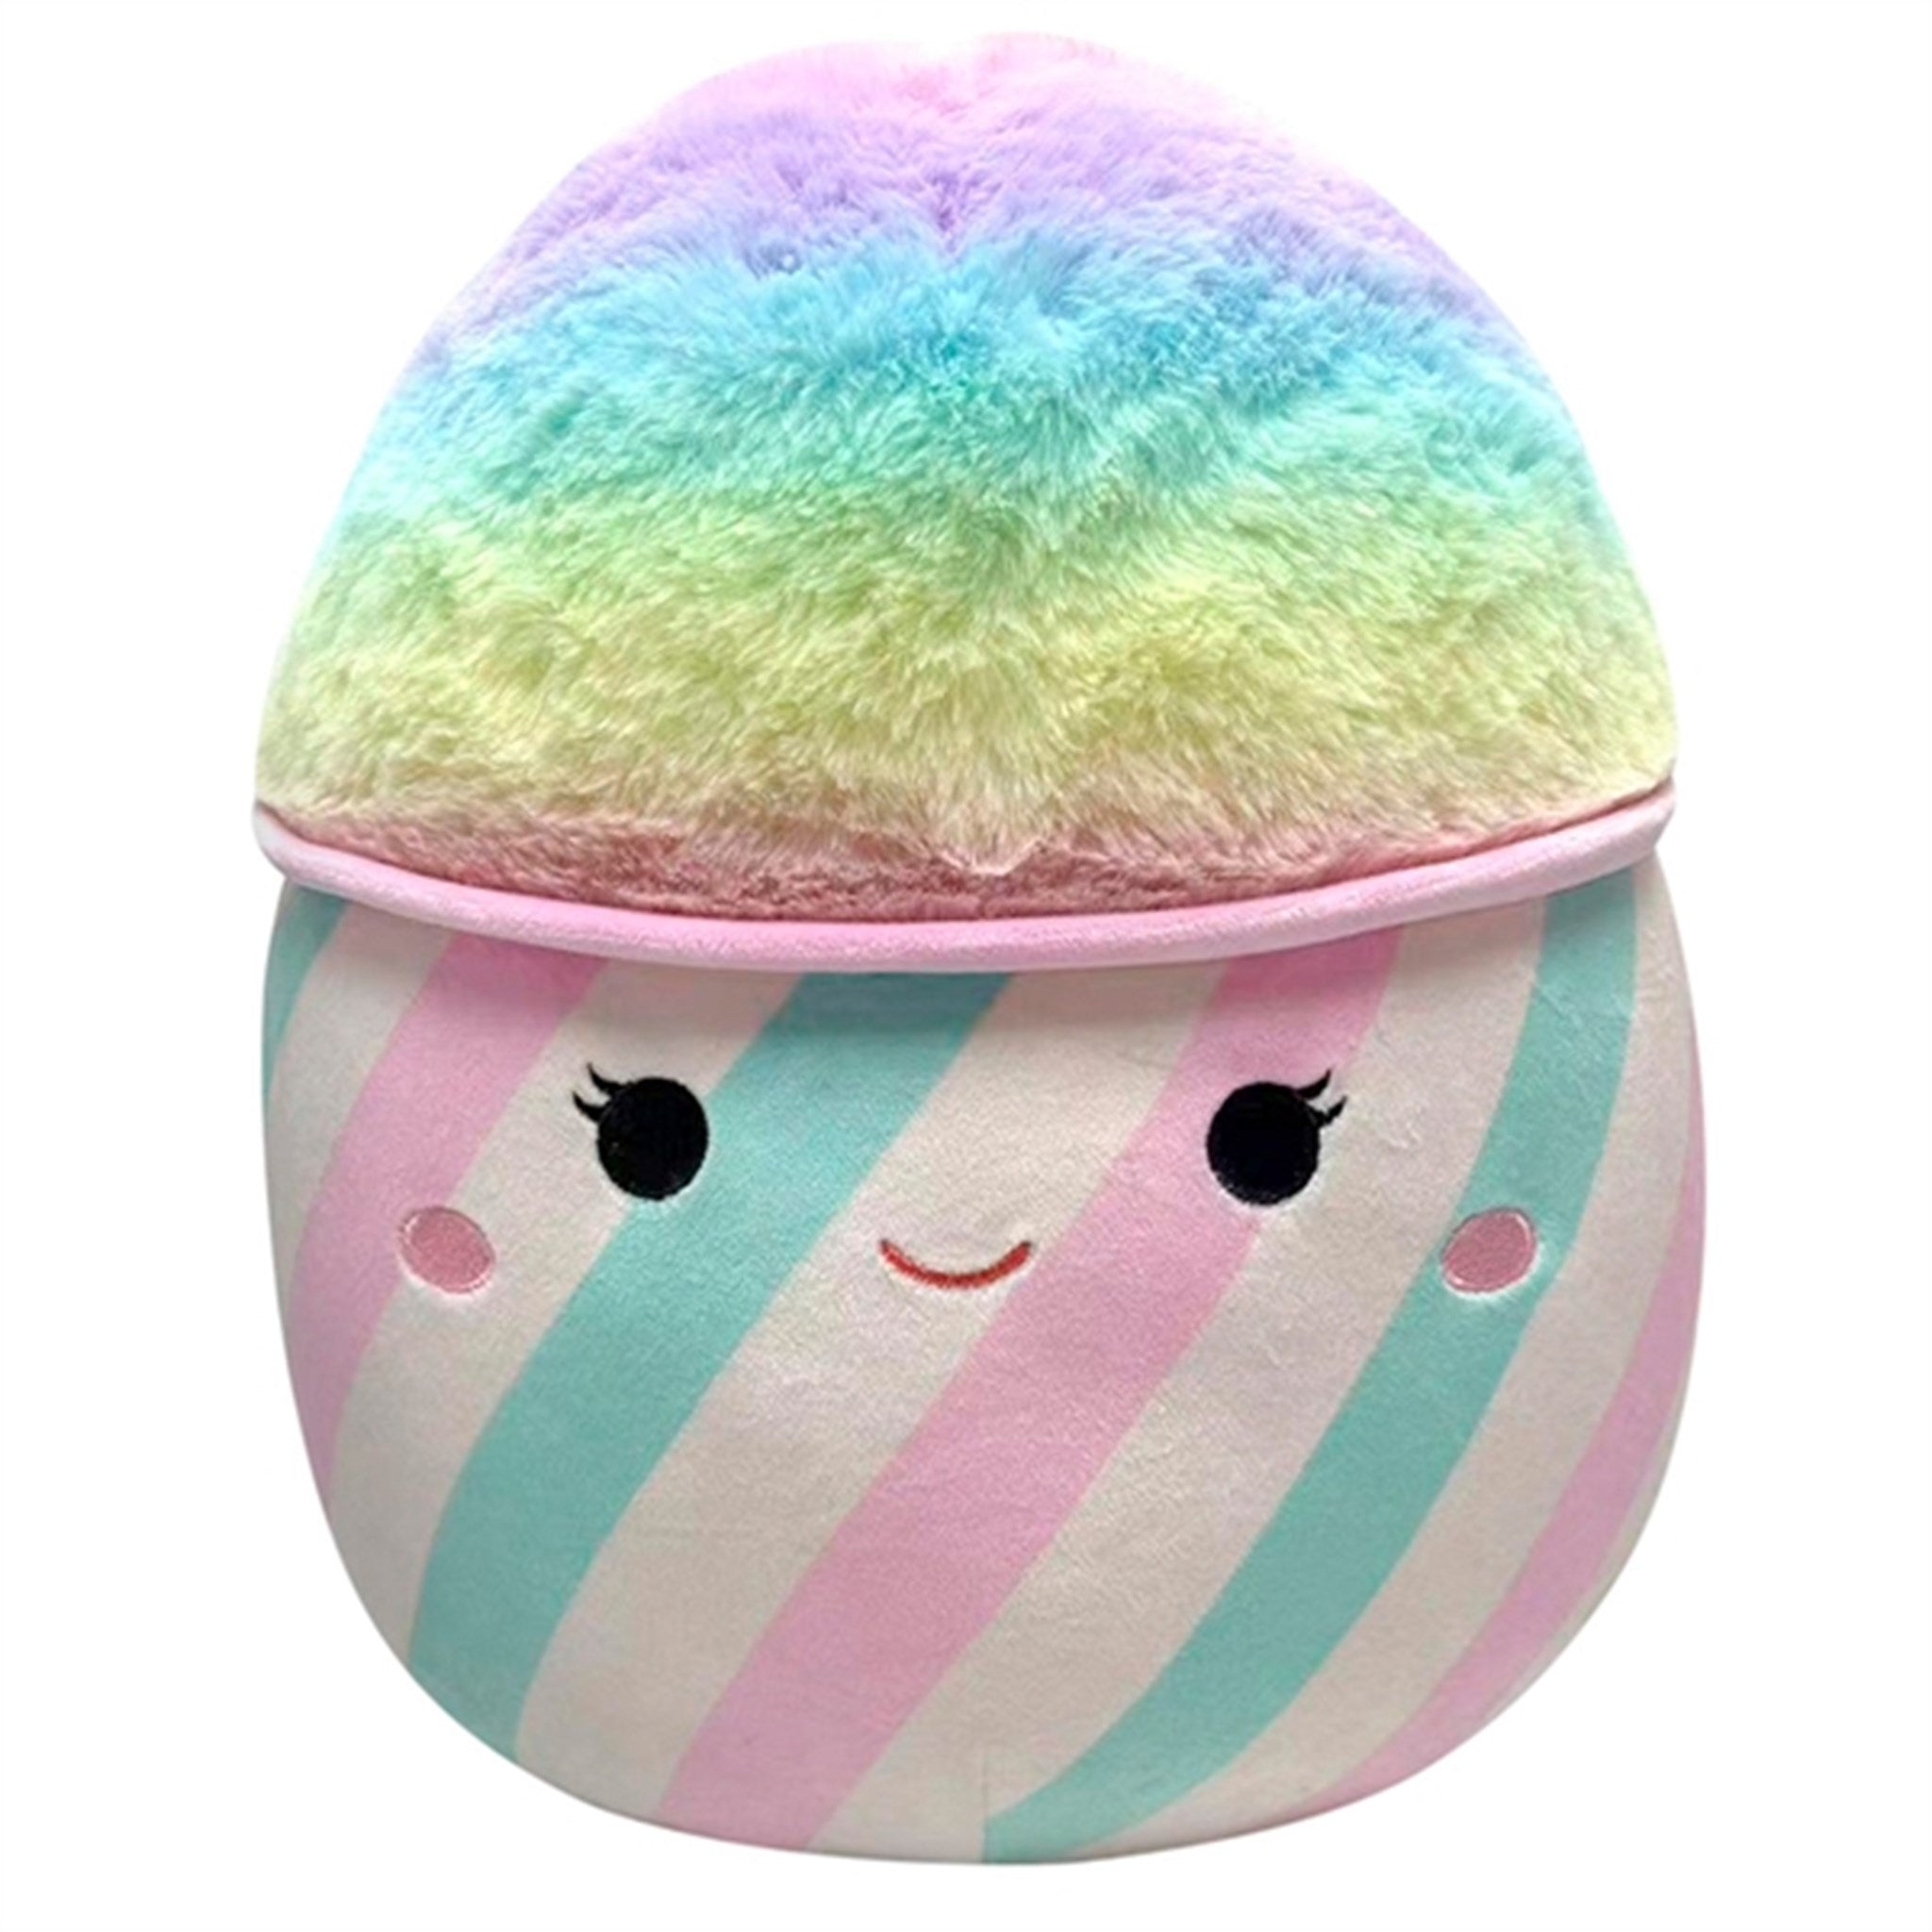 Squishmallows Bevin the Cotton Candy 30 cm P15